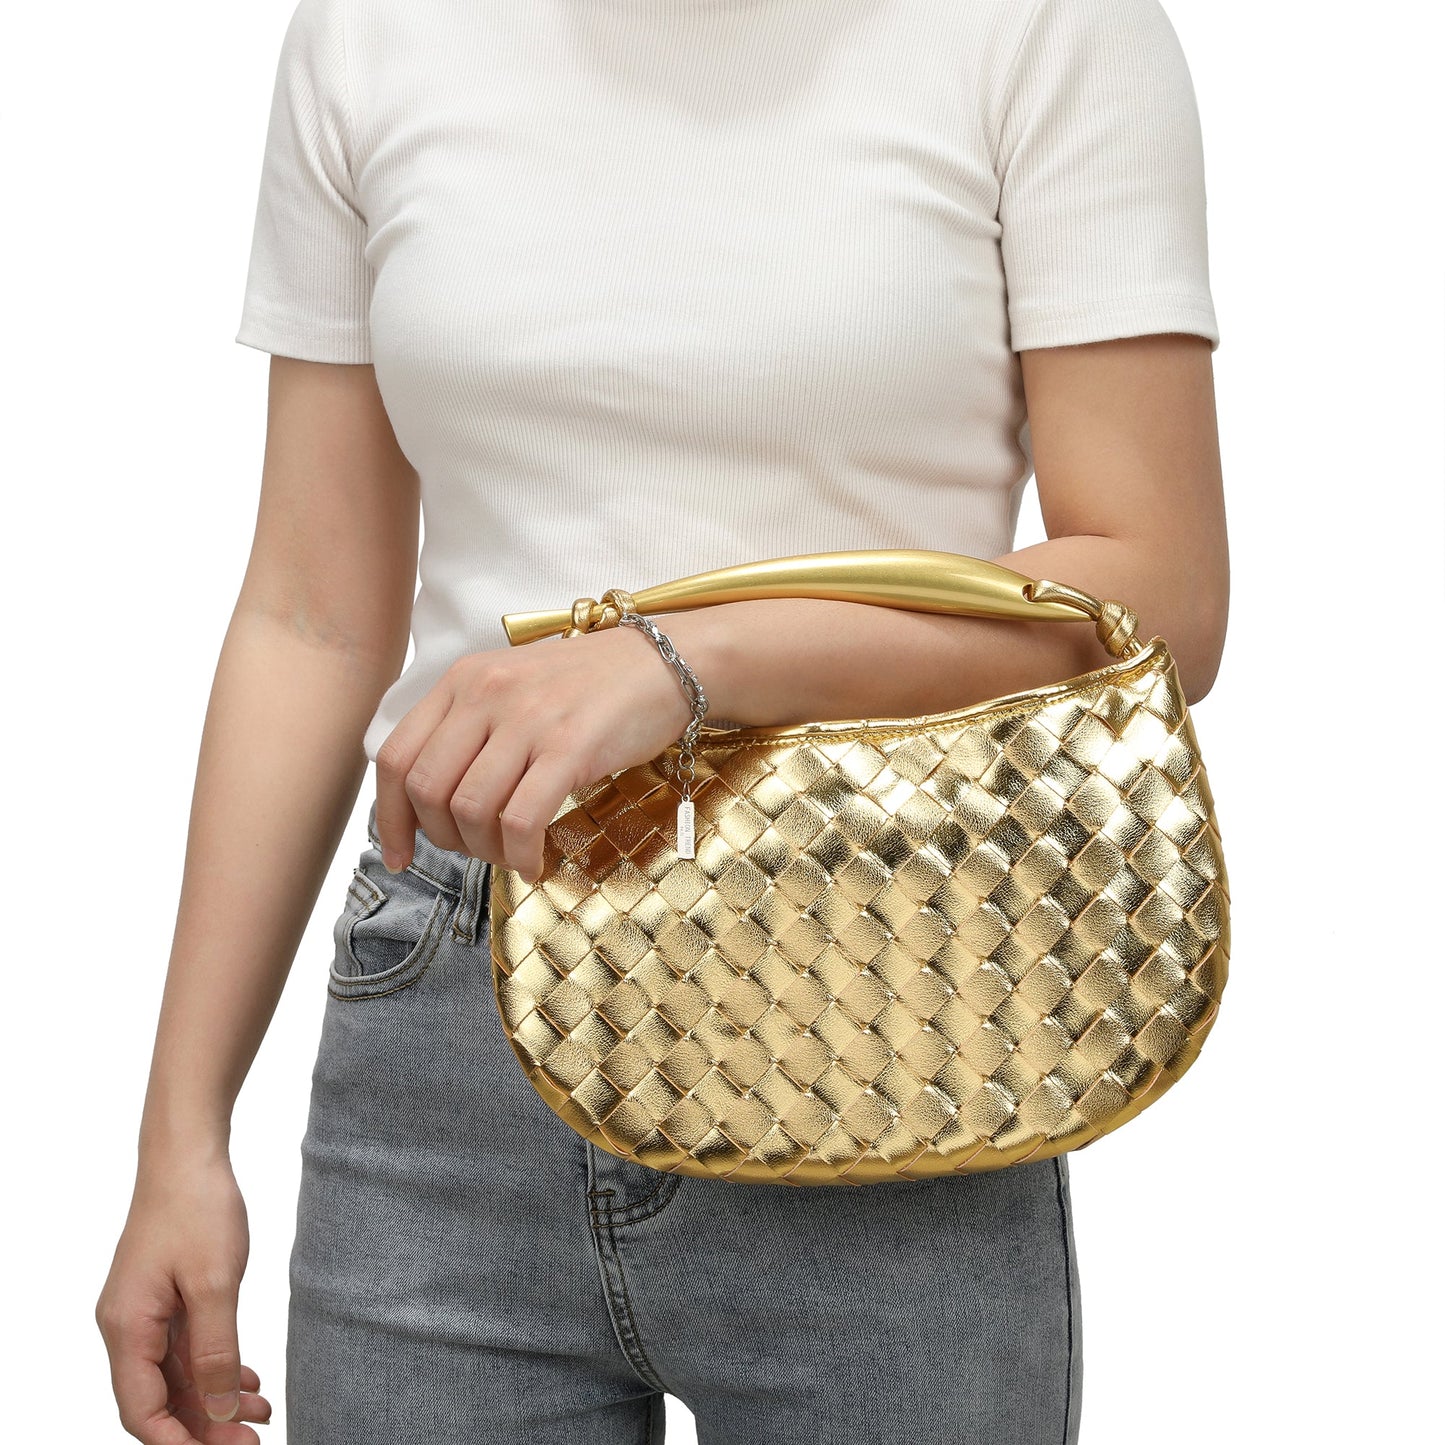 Woven Leather Top-Handle Bag/Clutch